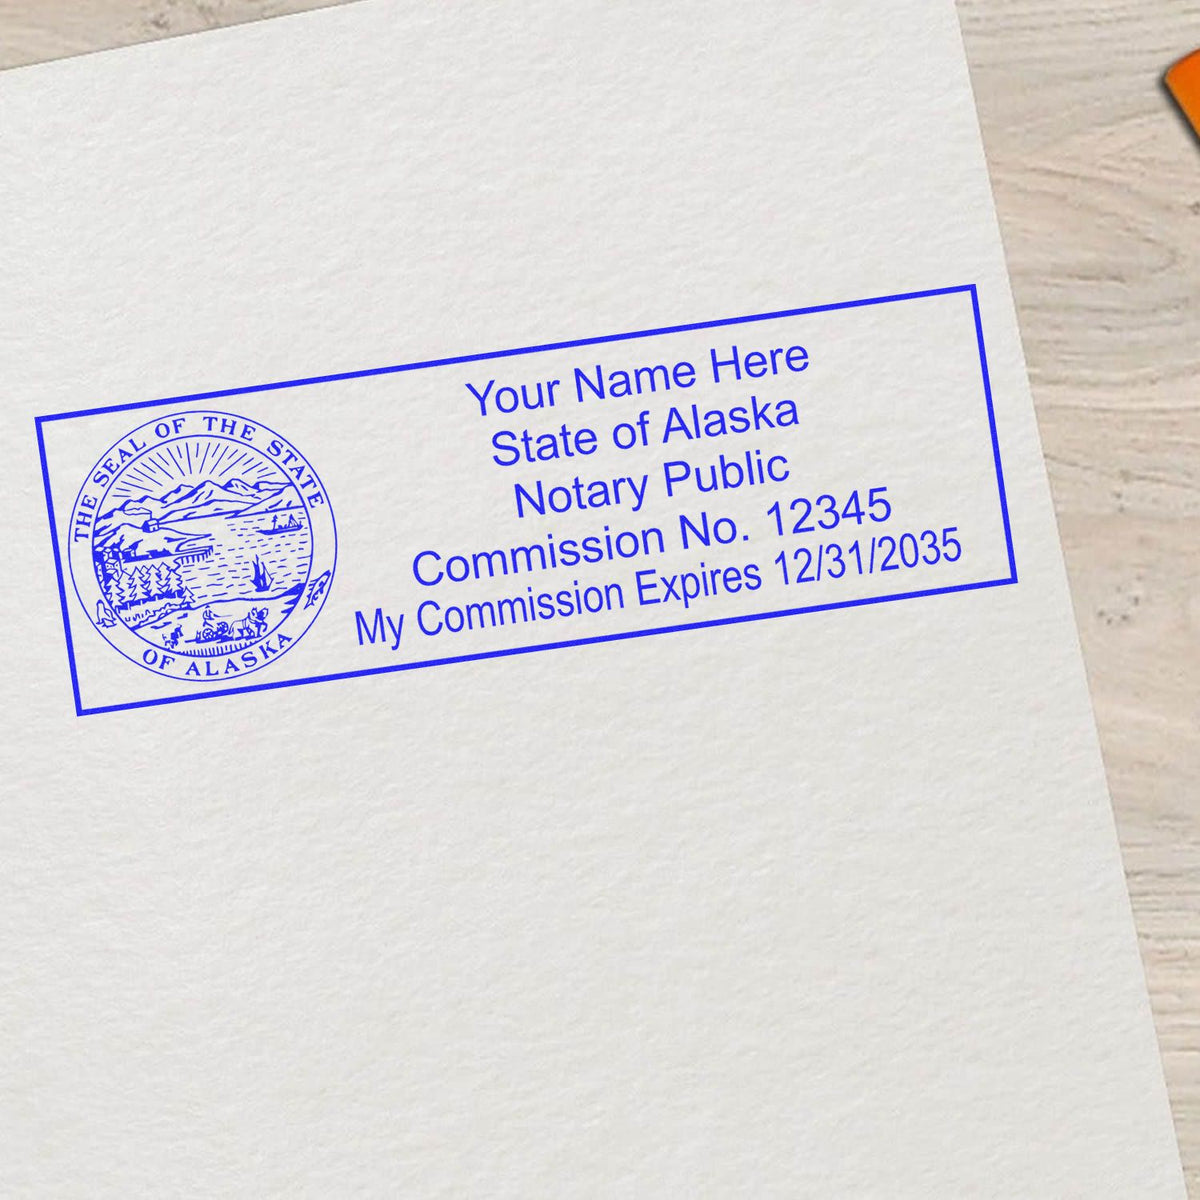 The PSI Alaska Notary Stamp stamp impression comes to life with a crisp, detailed photo on paper - showcasing true professional quality.